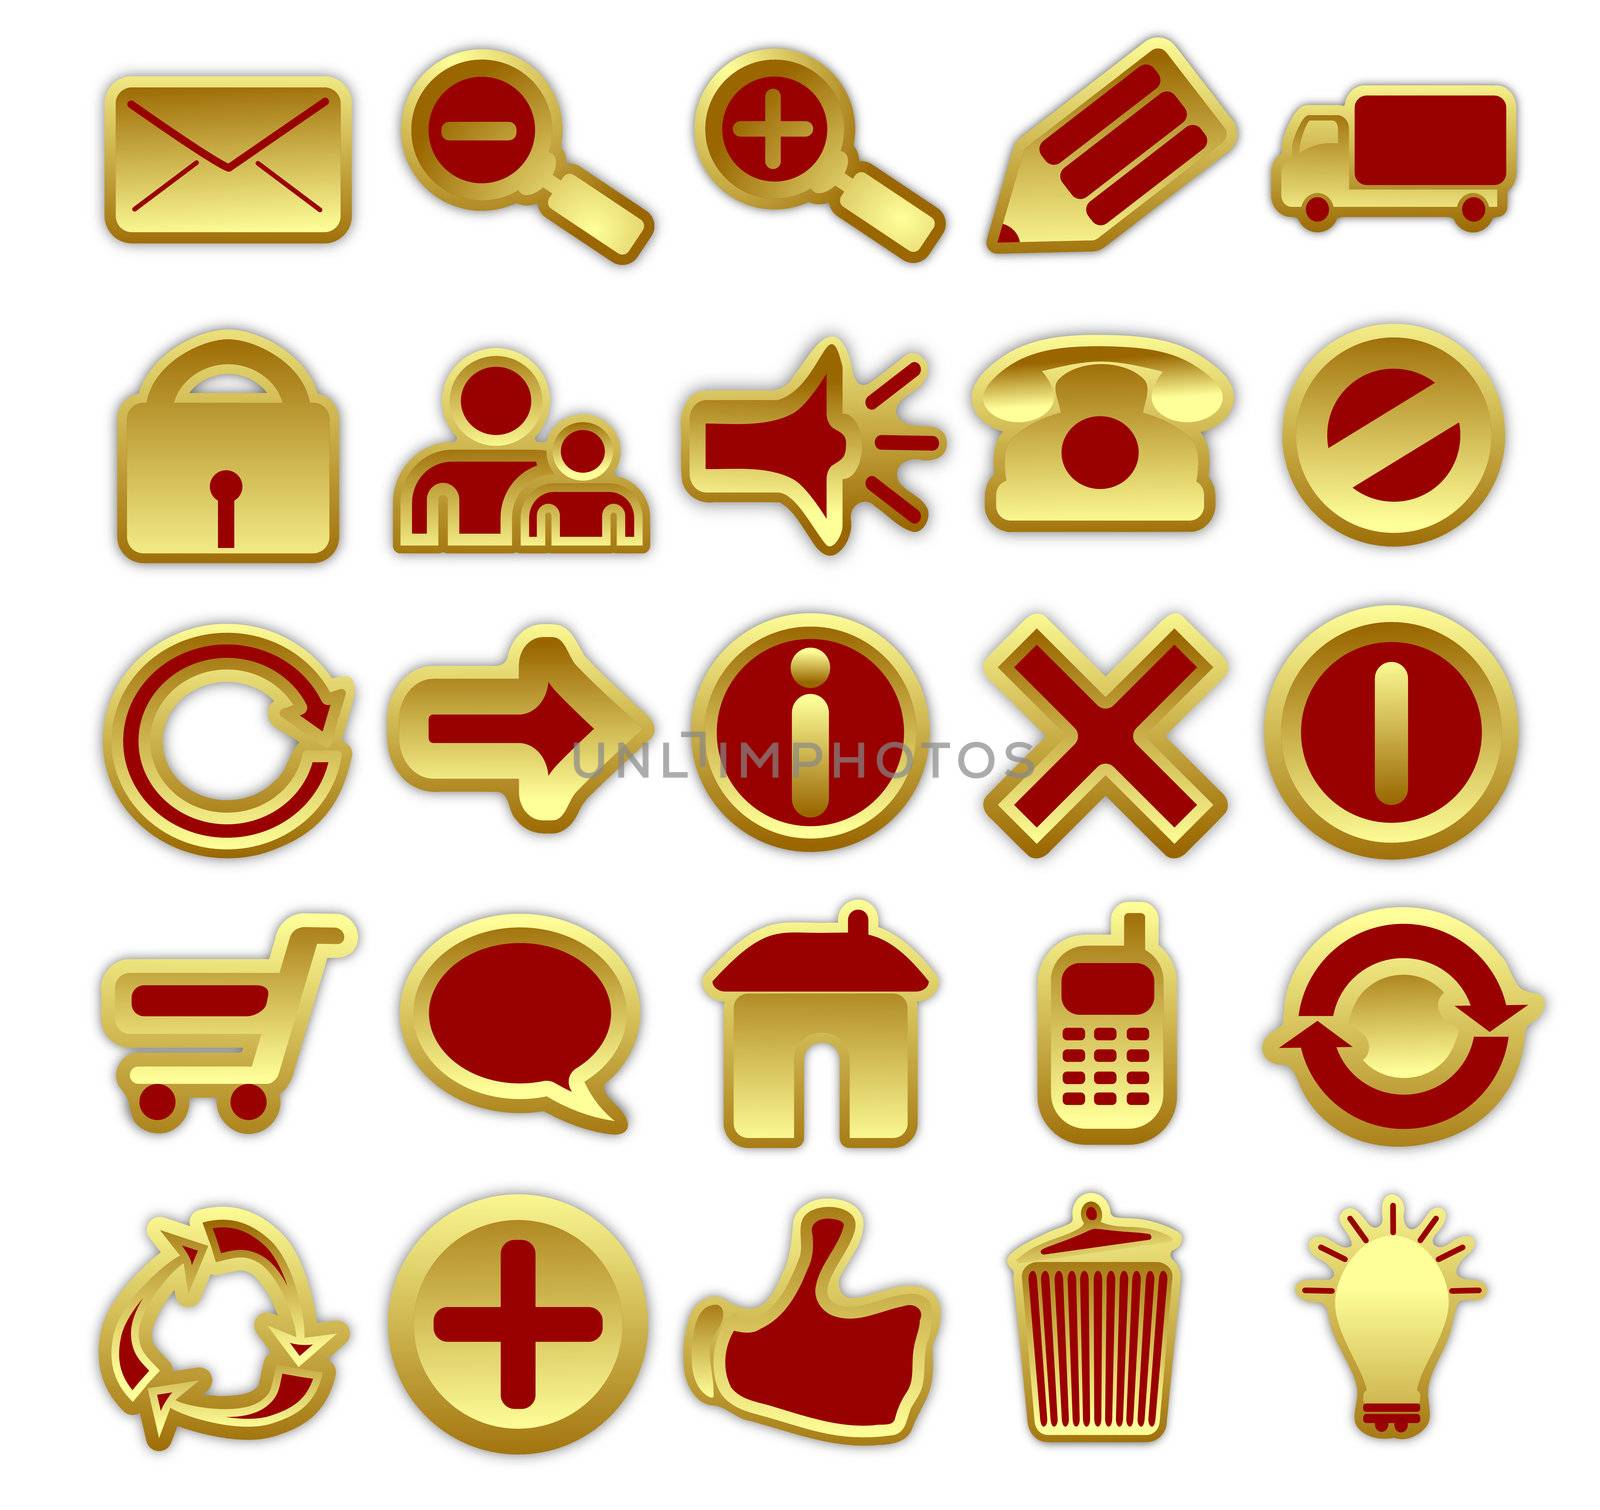 Red and Golden Web Icons by RichieThakur